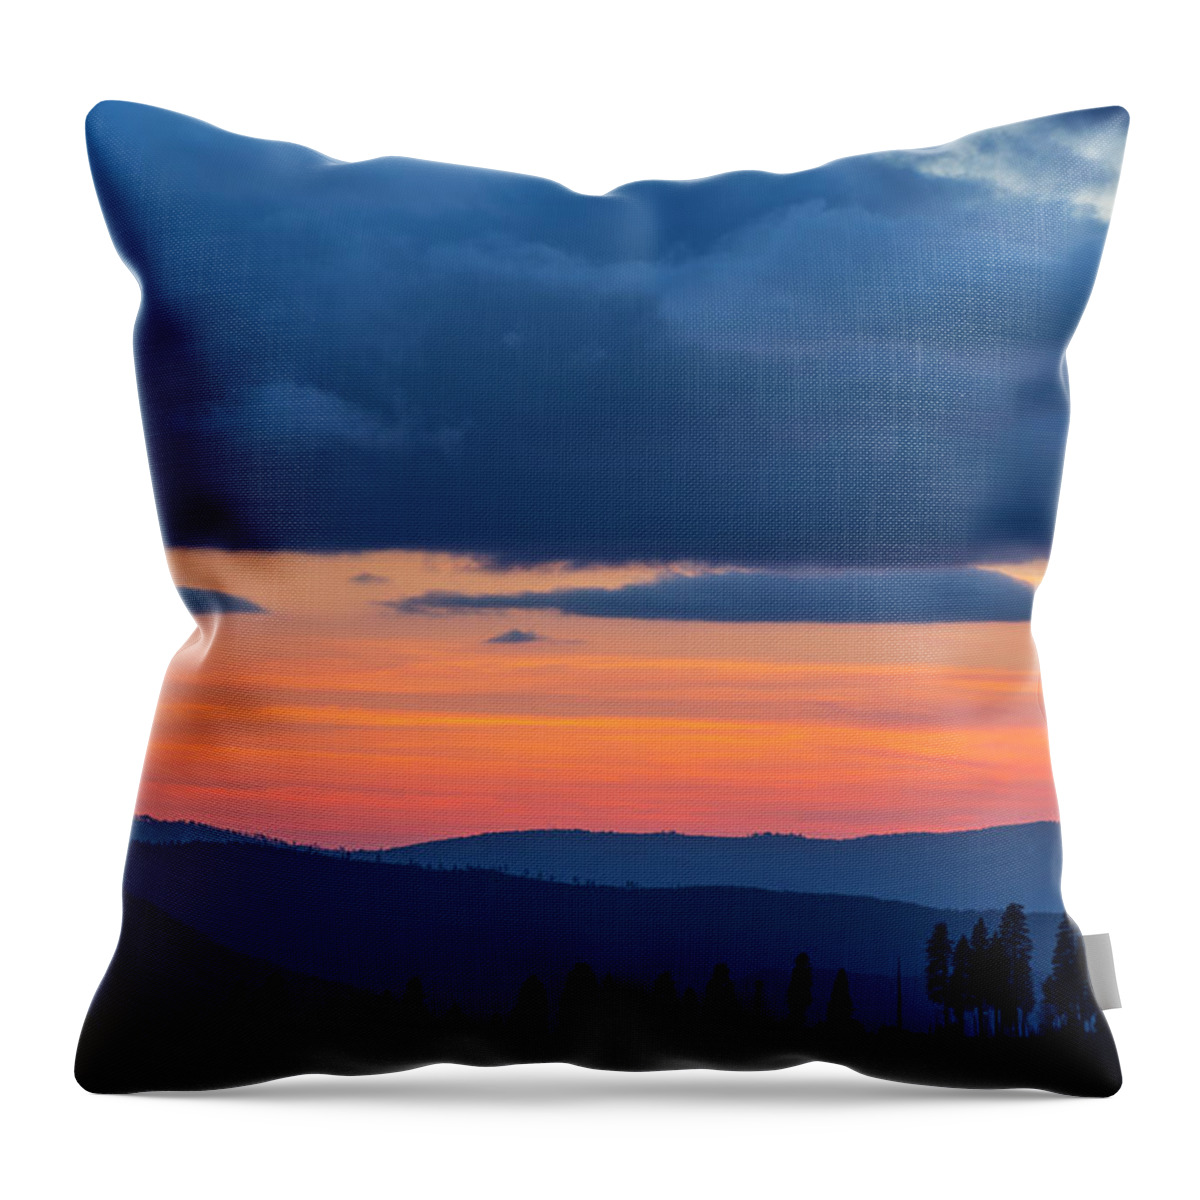 Scenics Throw Pillow featuring the photograph Cloudy Sunset In Yosemite by Regis Vincent